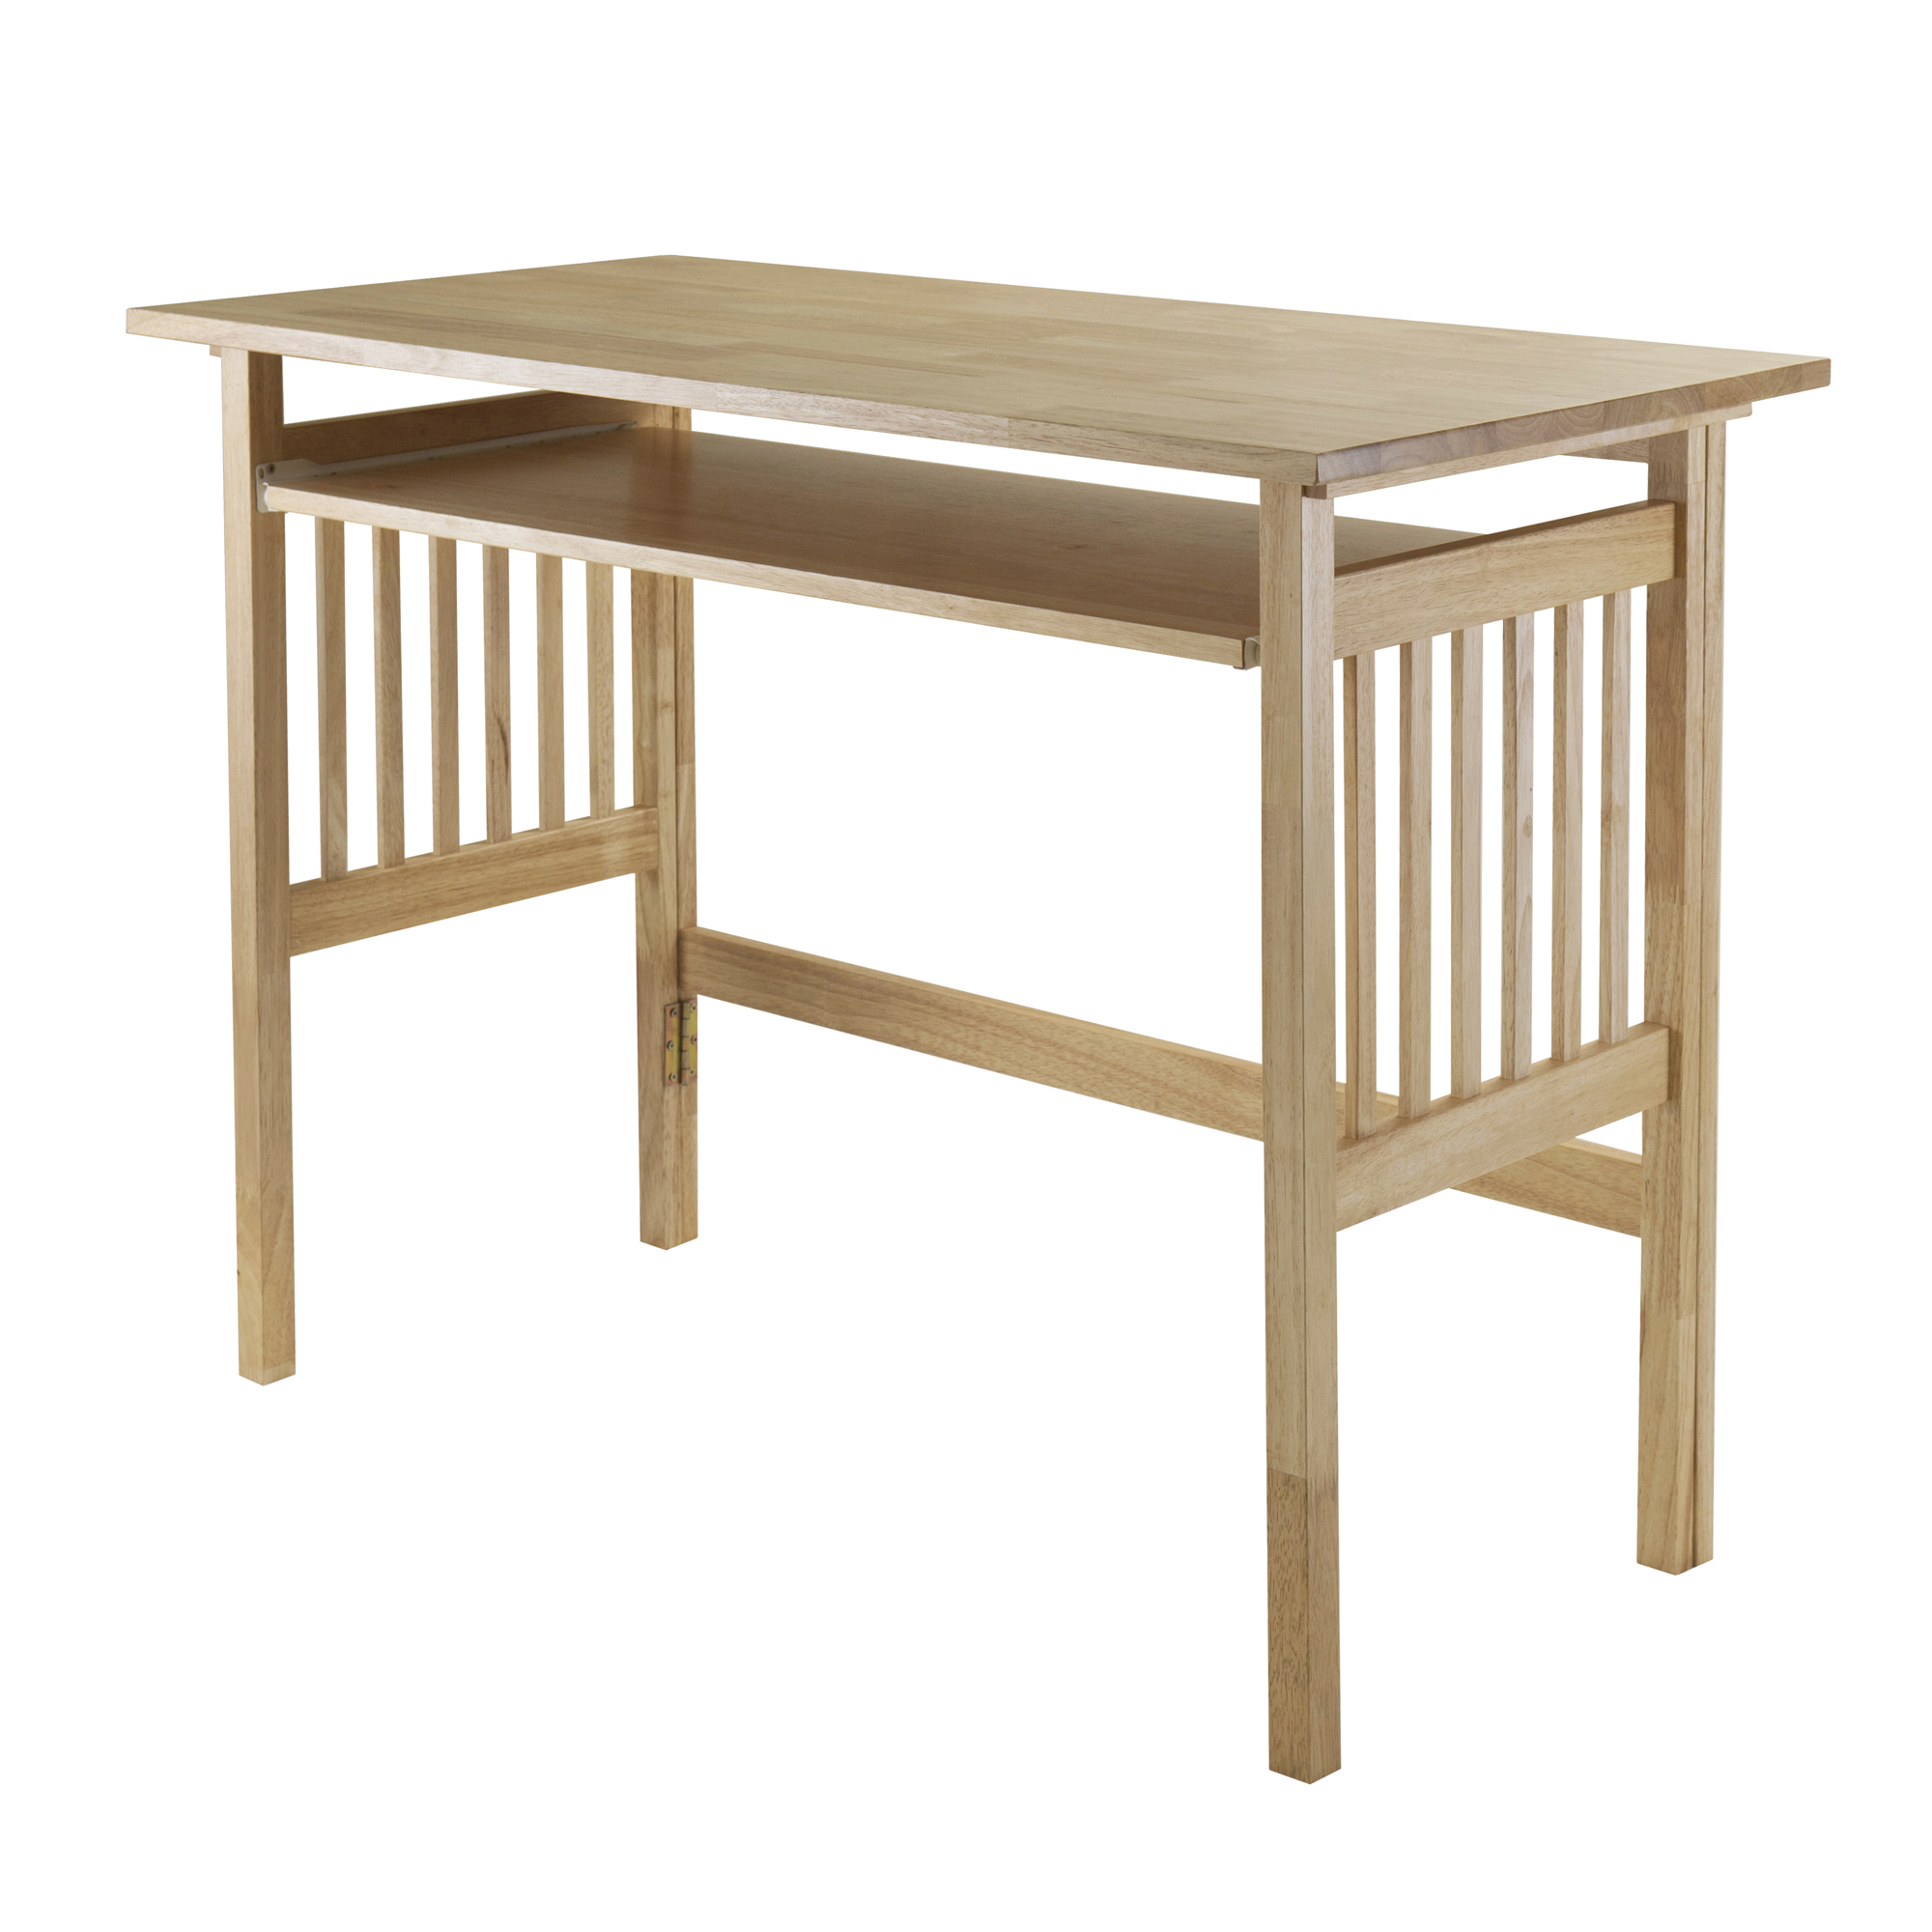 Winsome Wood Mission Foldable Computer Desk, Natural Finish - image 1 of 11